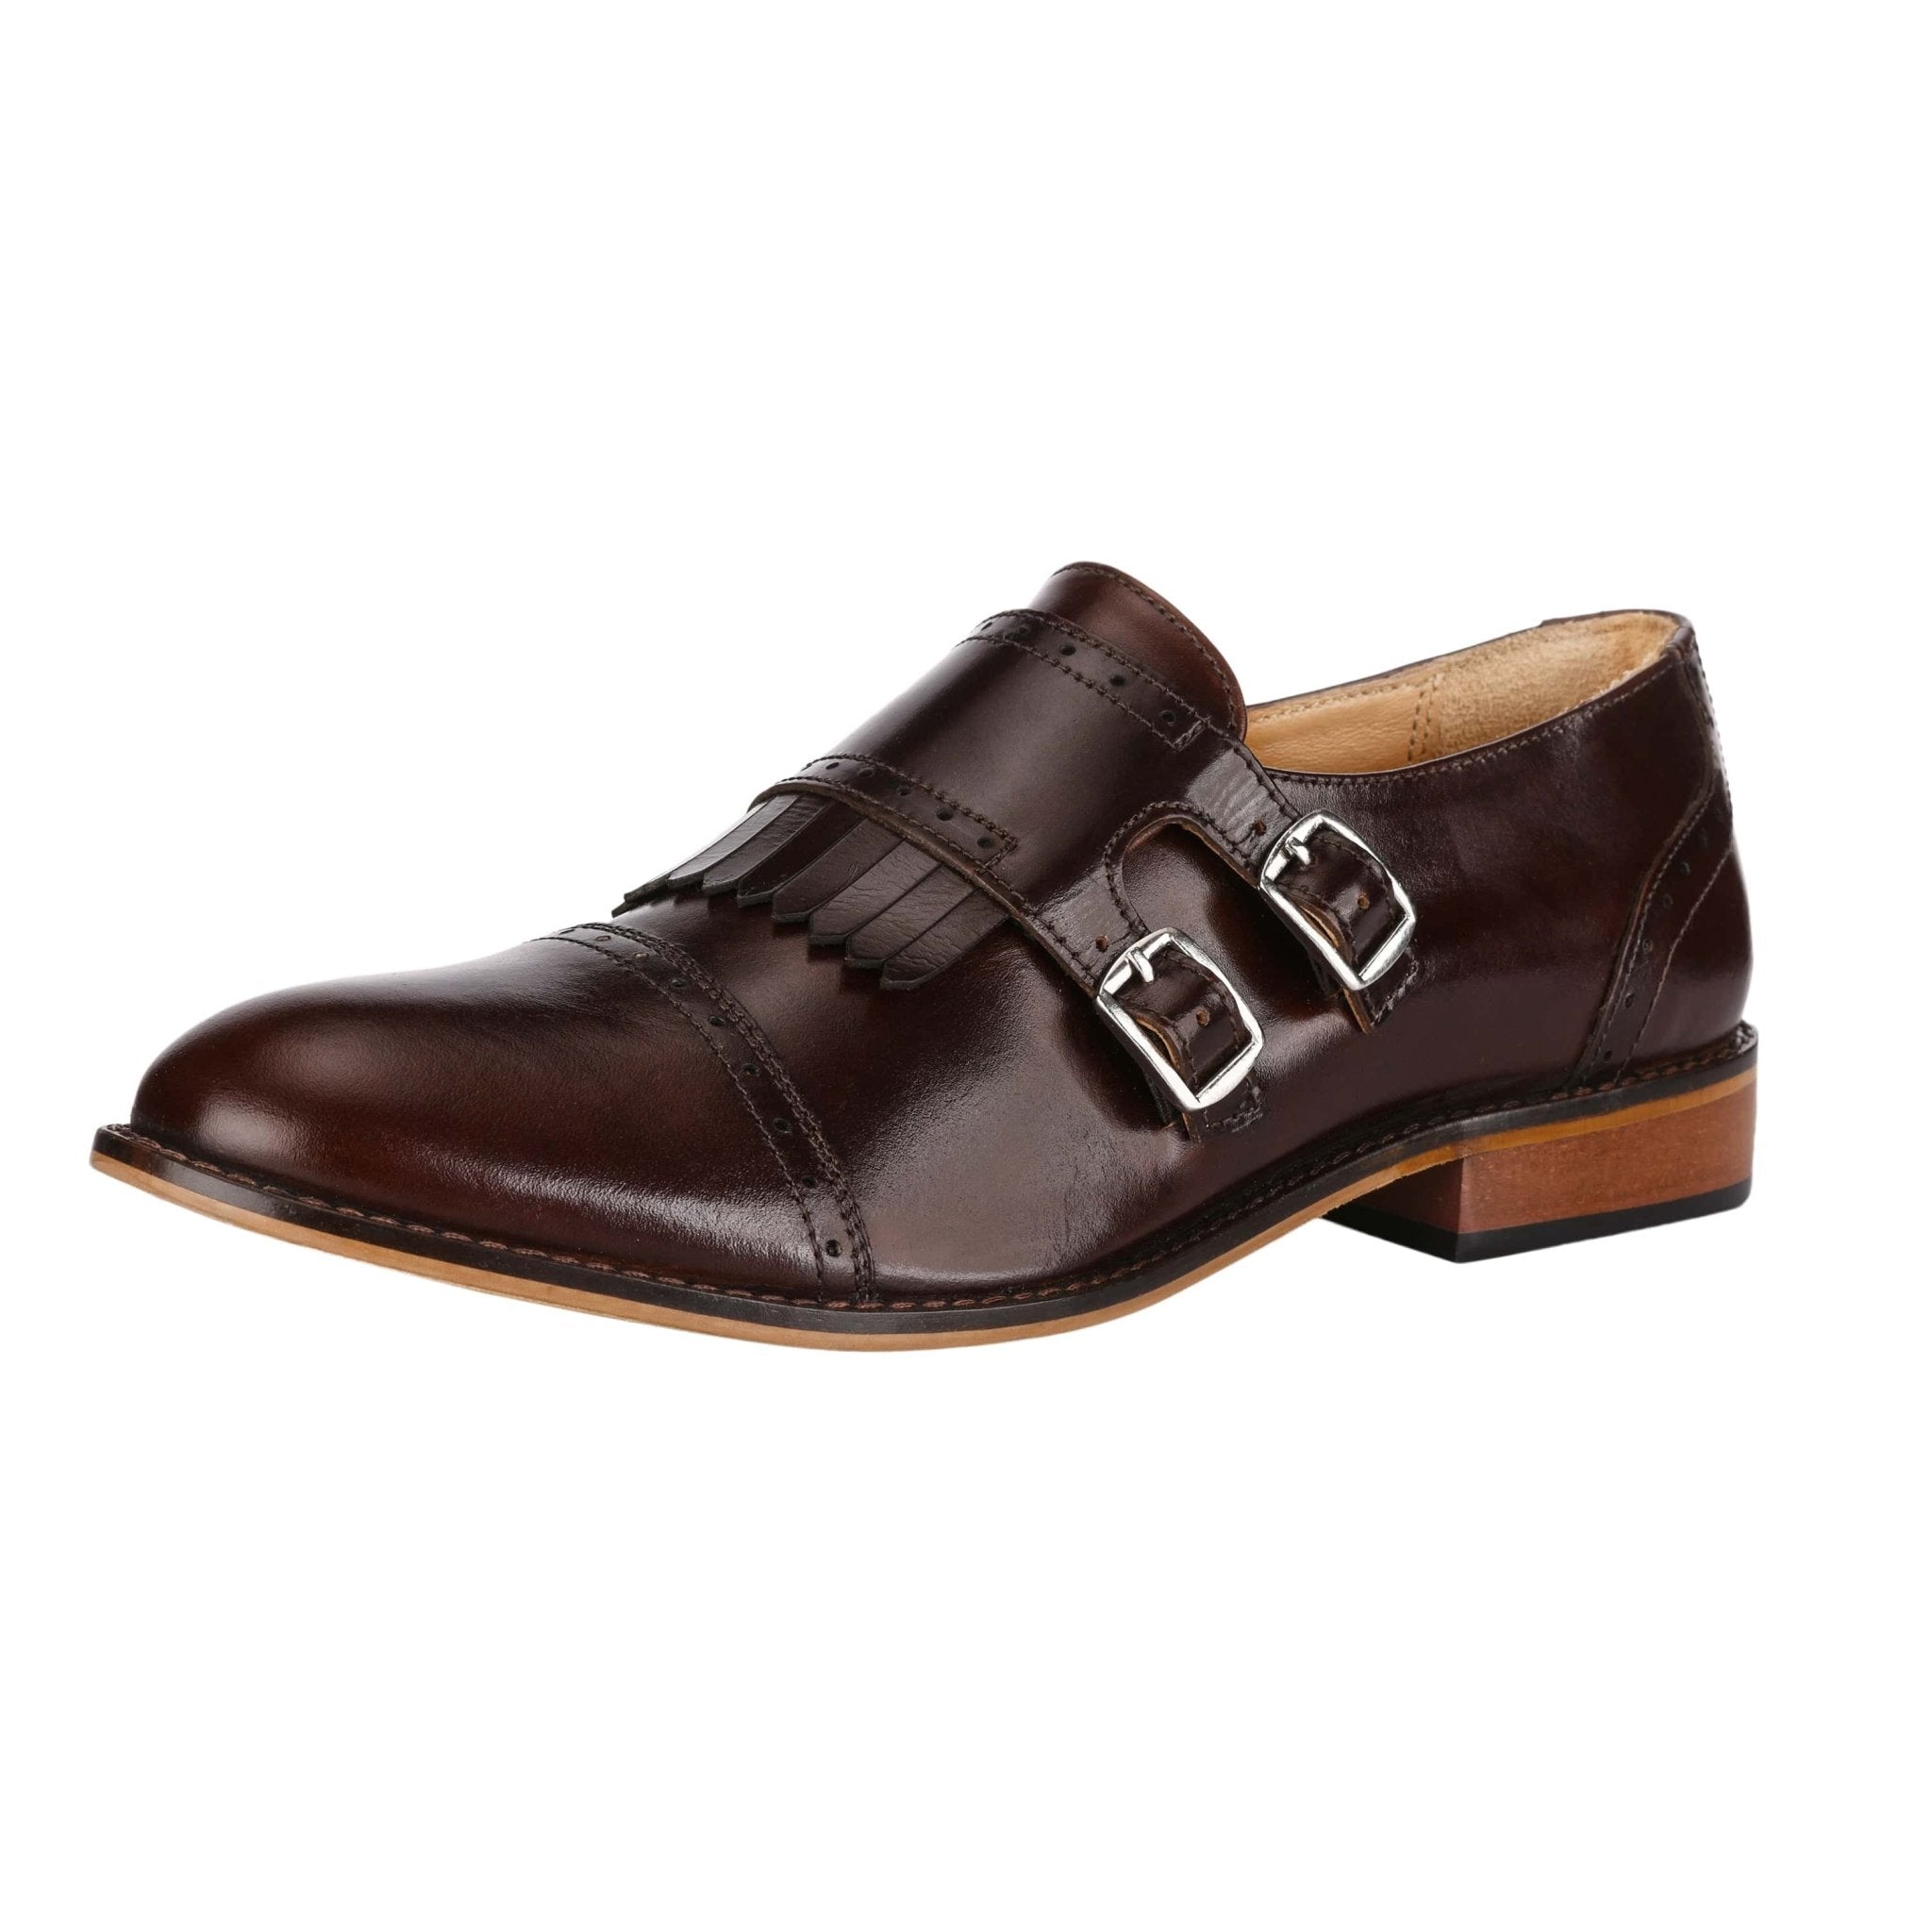 Guess Who? It’s Double Monk Strap for You!!!